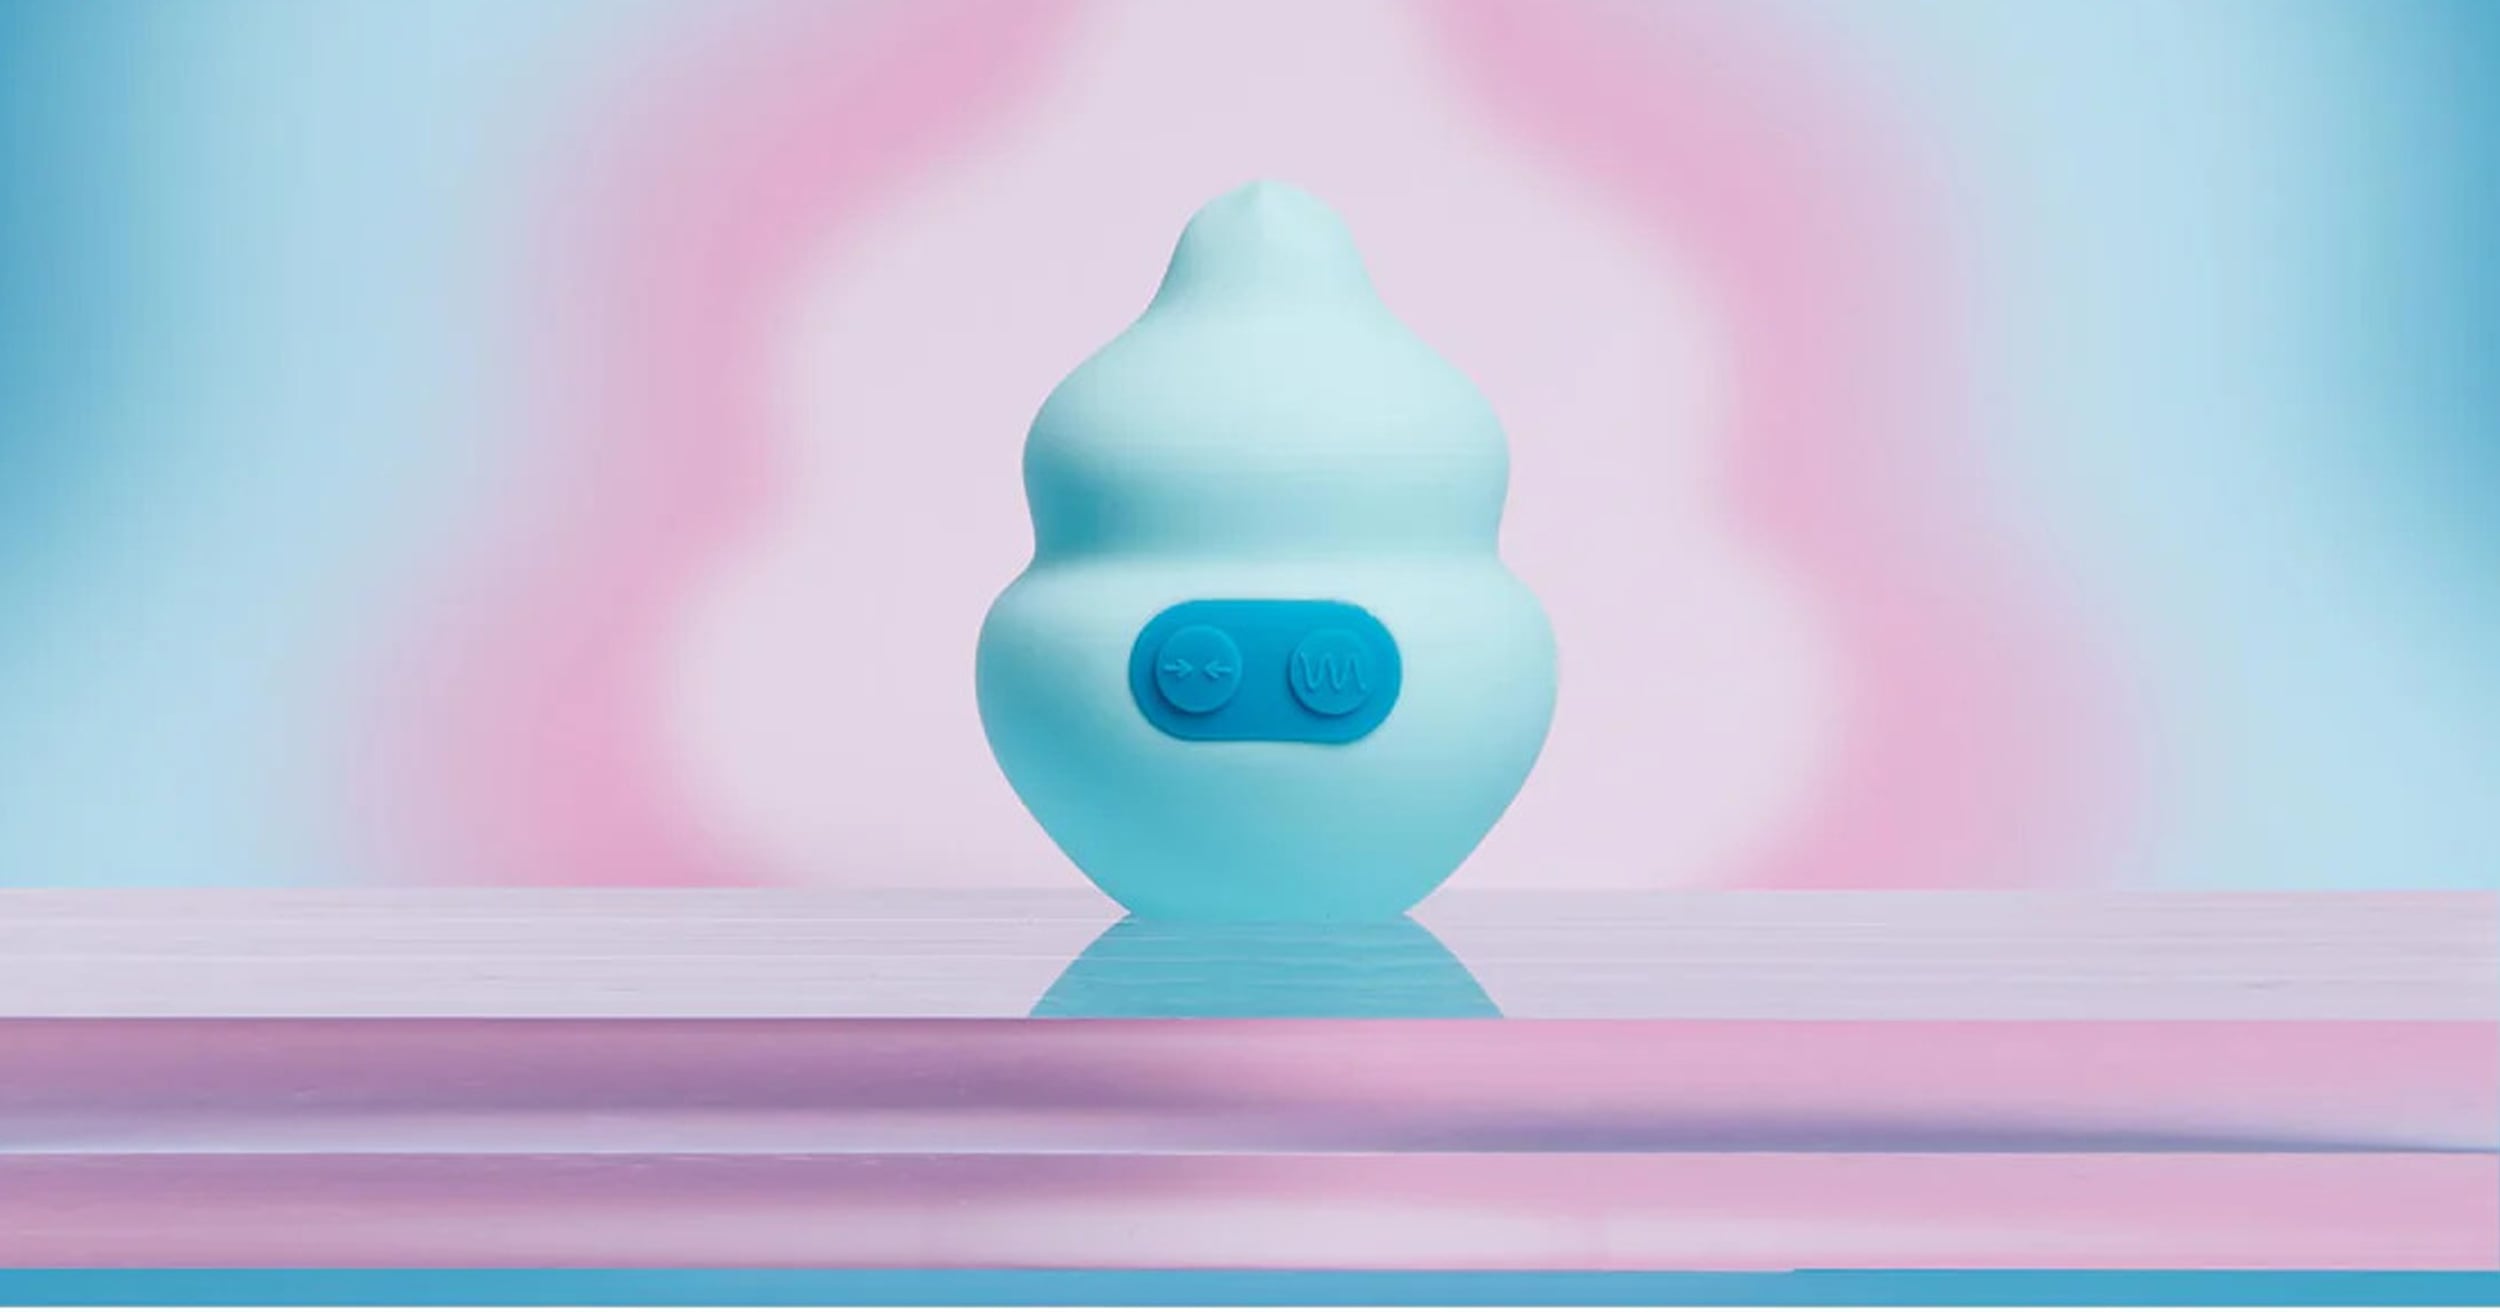 Squishy Sex Toys Are the Newest Trend, According to Sexperts